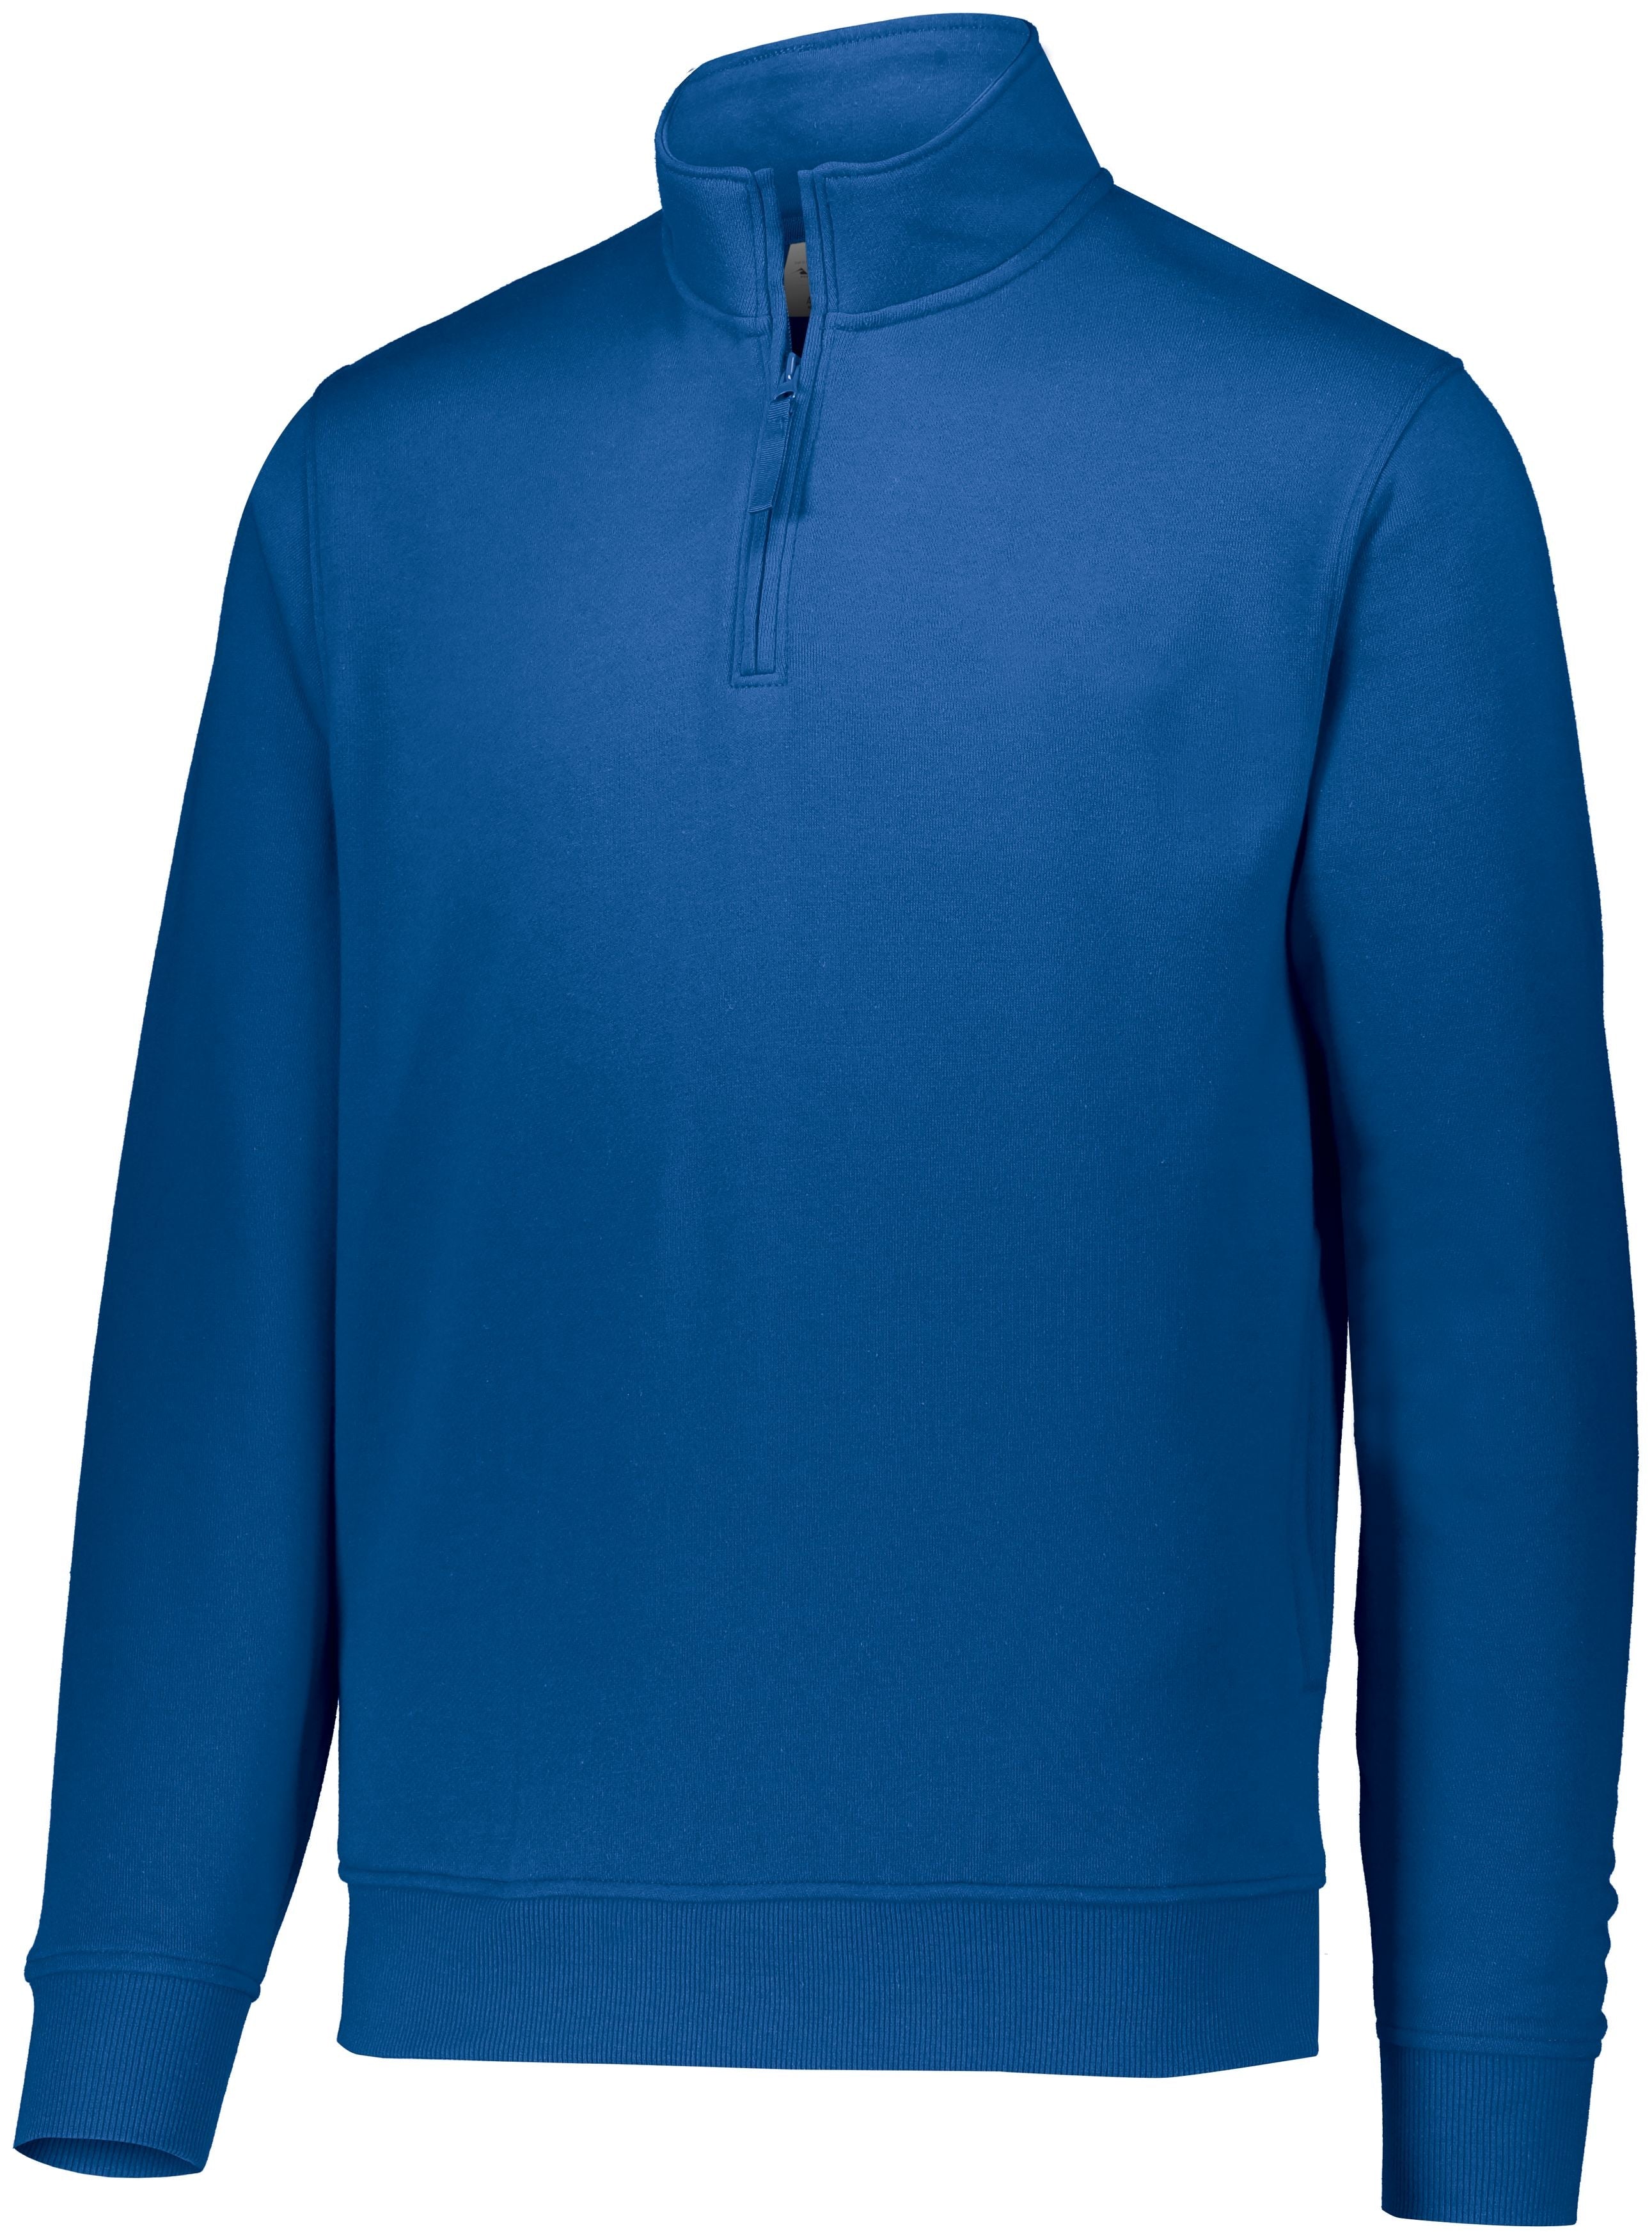 Augusta Sportswear 60/40 Fleece Pullover in Royal  -Part of the Adult, Adult-Pullover, Augusta-Products, Outerwear product lines at KanaleyCreations.com